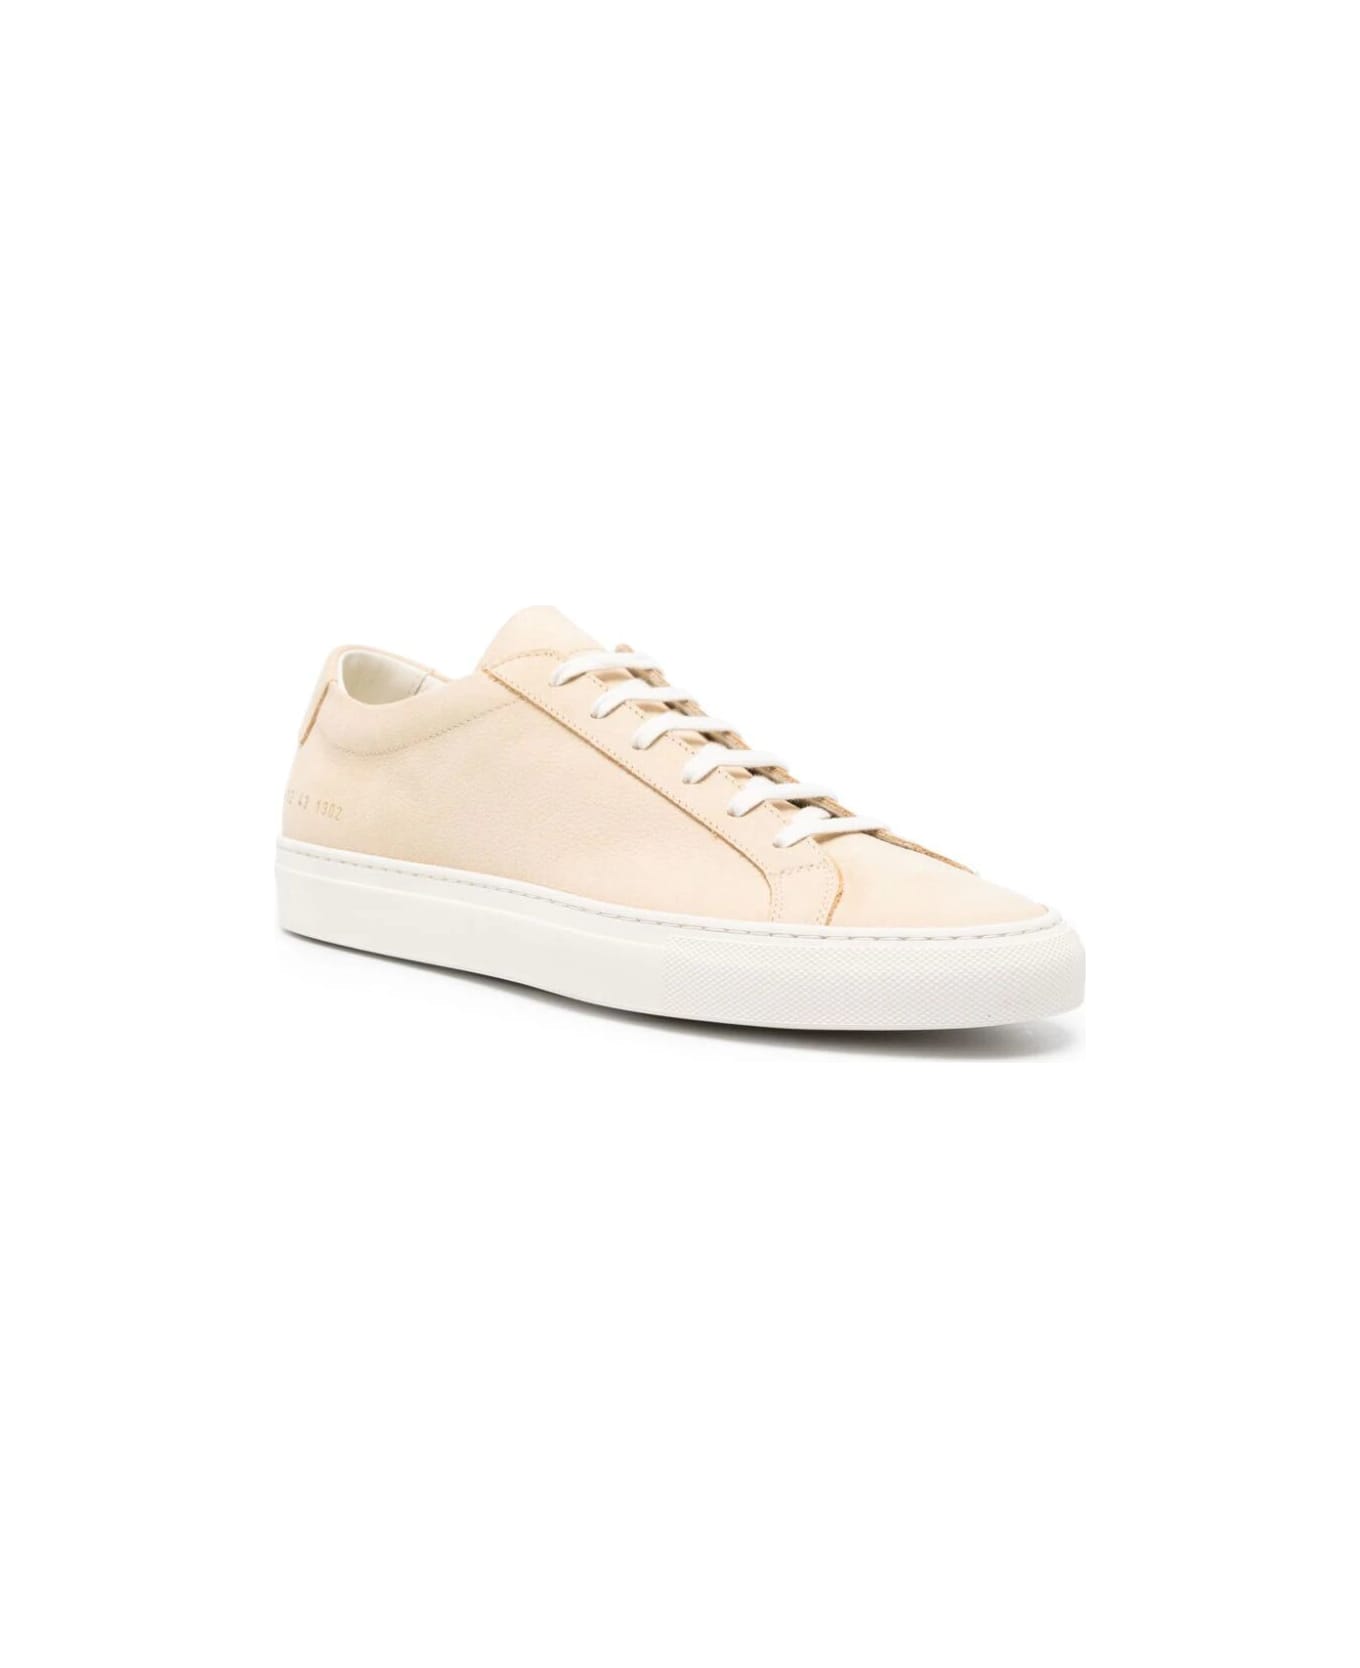 Common Projects Contrast Achilles Sneaker - Tan スニーカー